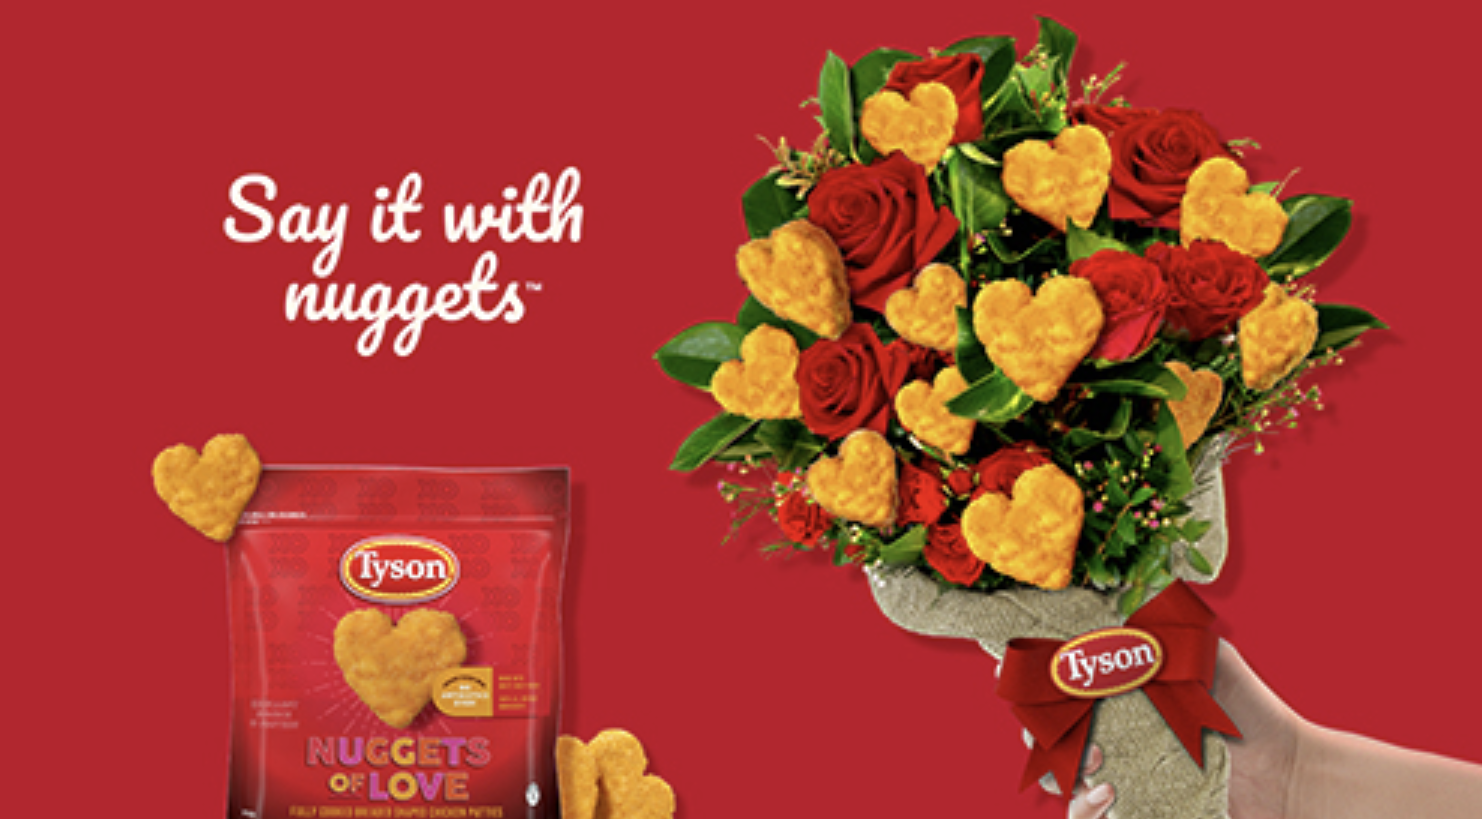 A hand holds a bouquet of flowers and chicken nuggets as part of Tyson's Valentine's Day marketing campaign.